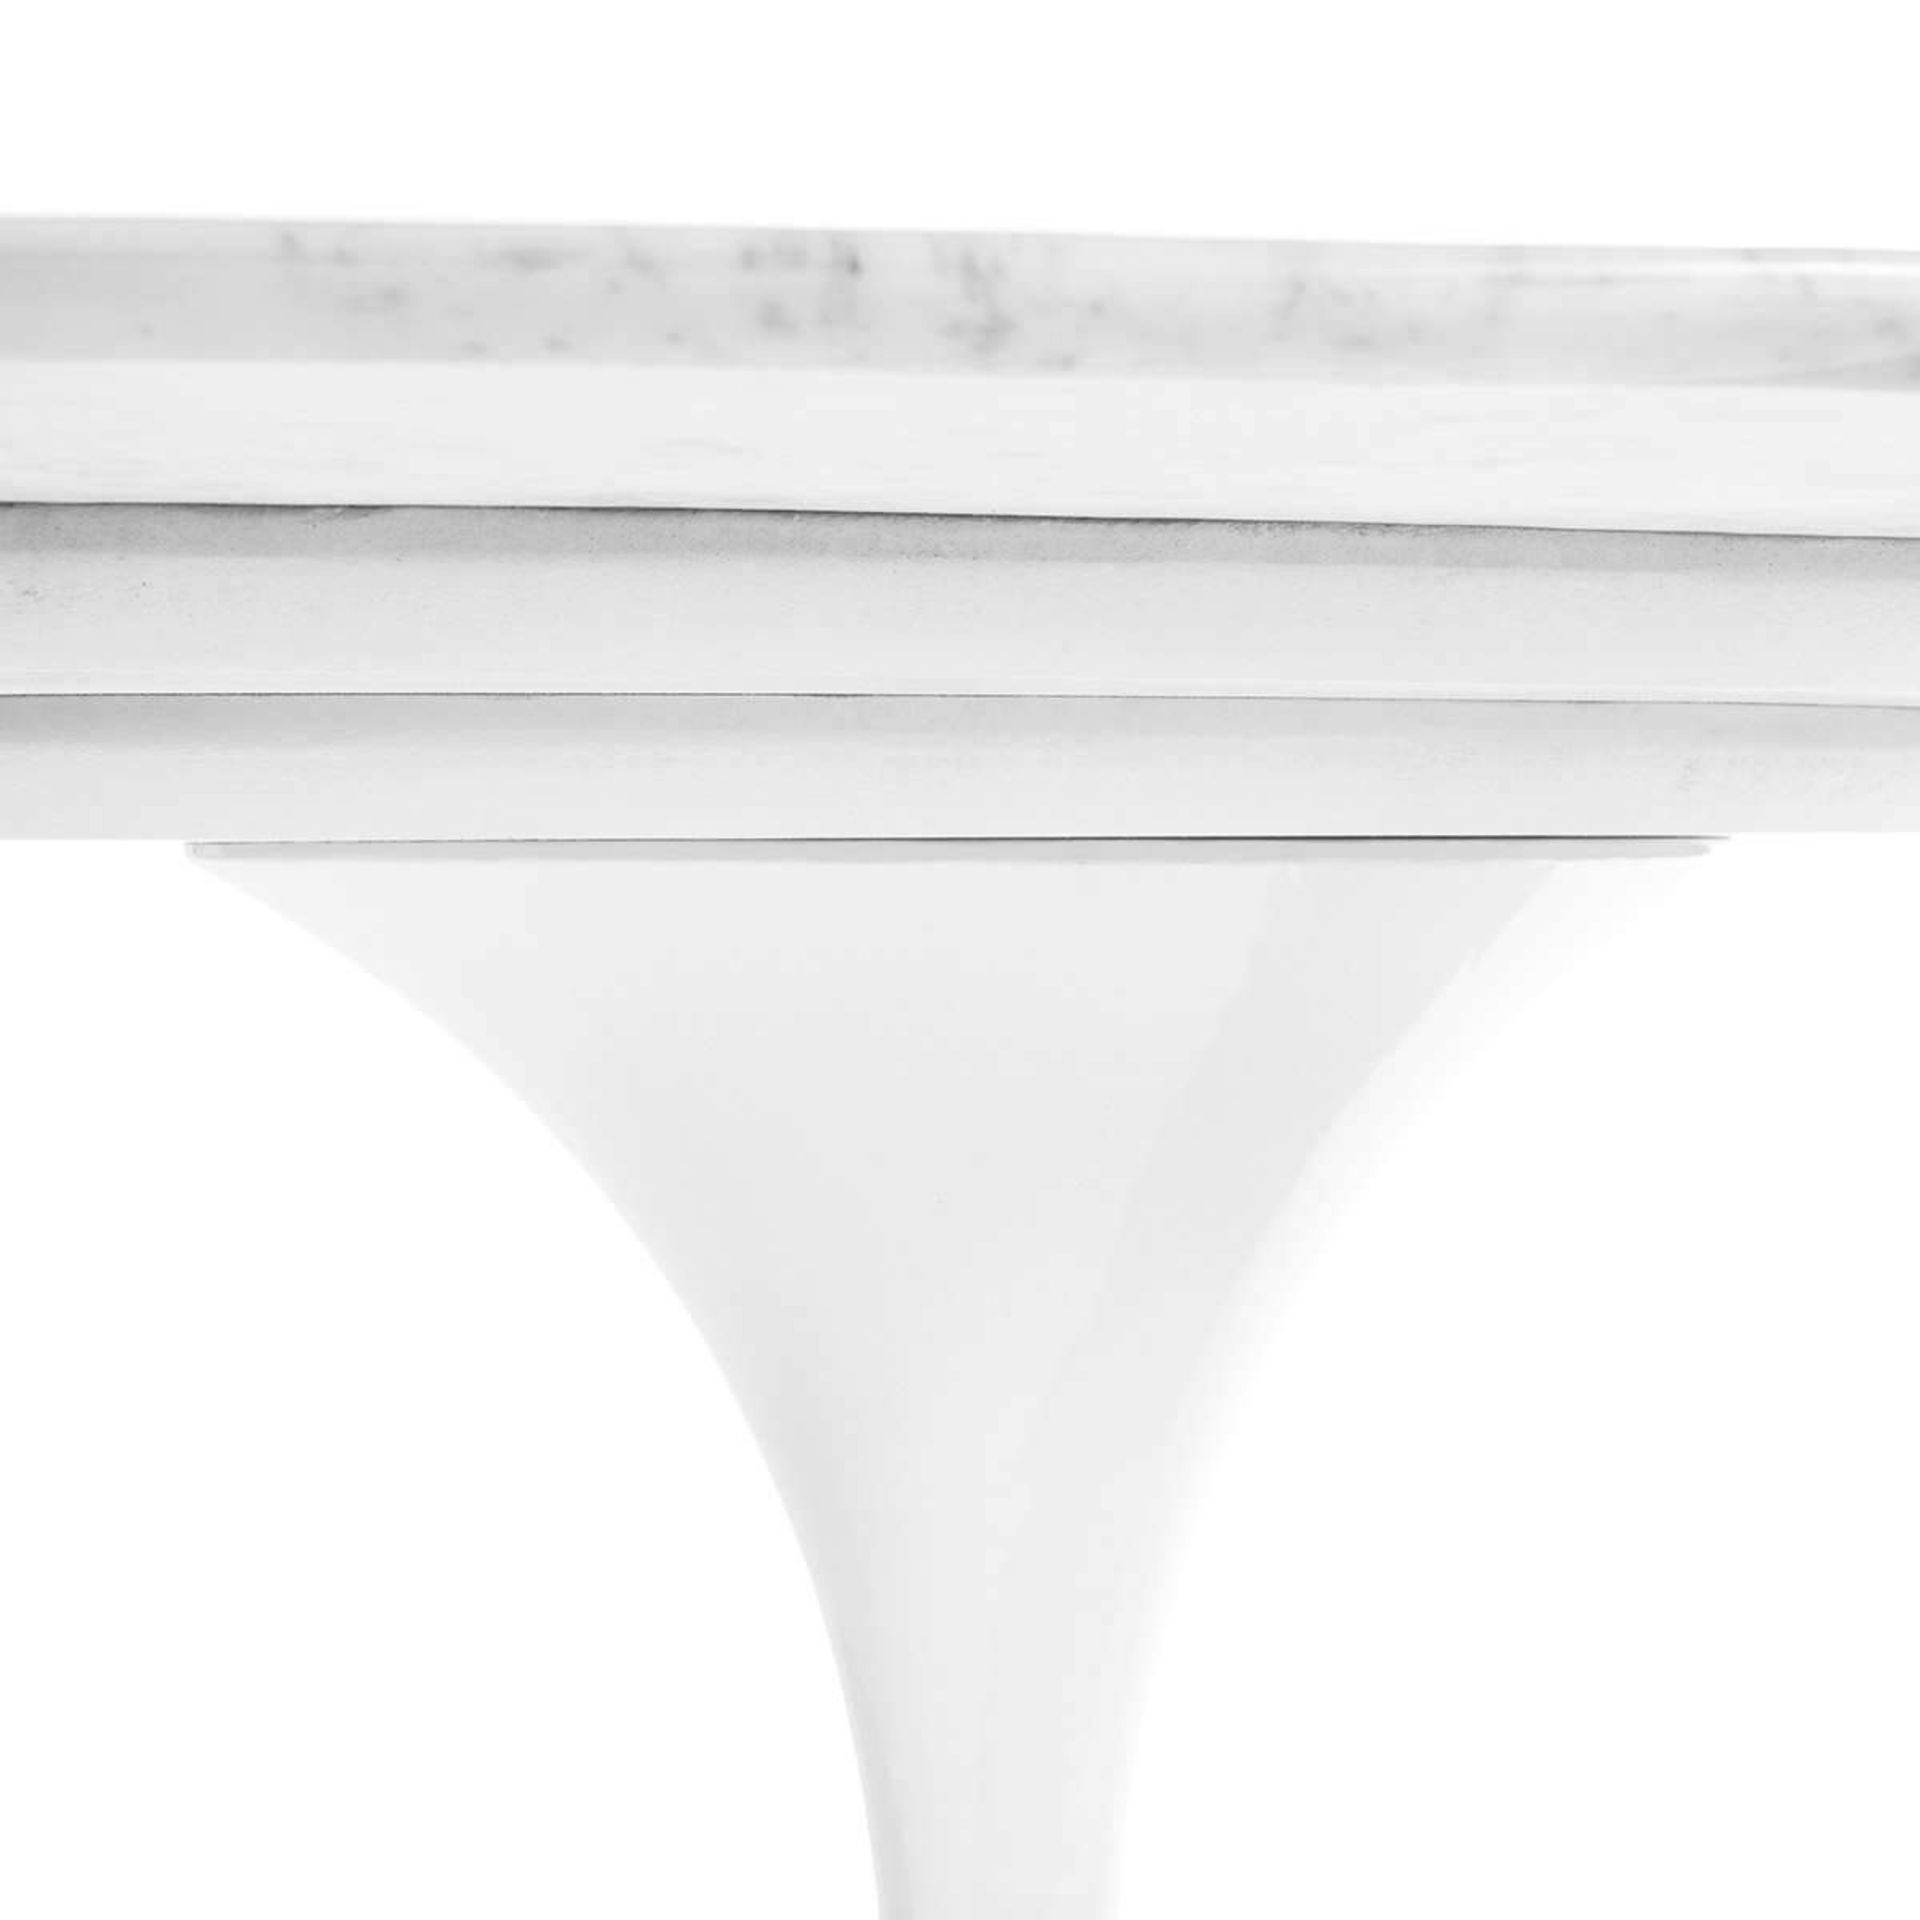 1 x Eero Saarinen Inspired Carrara Marble Tulip Dining Table - 1950's Reproduction Oval Dining Table - Image 2 of 5